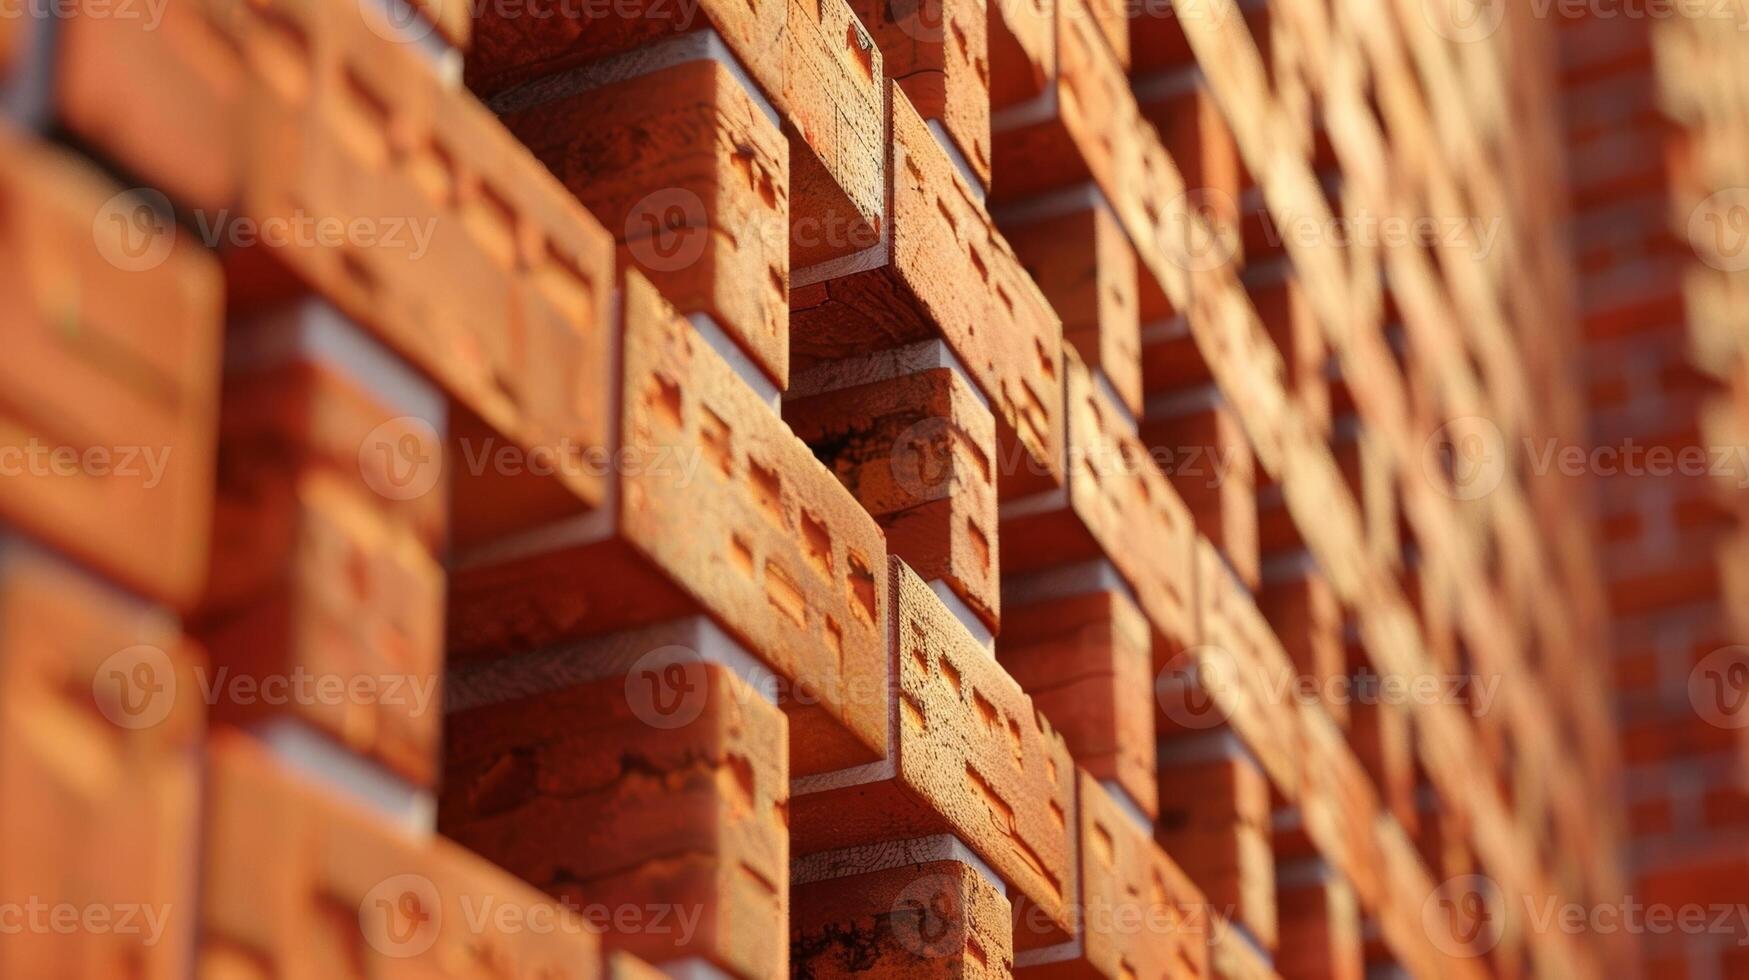 The importance of attention to detail in creating a flawless brick structure photo